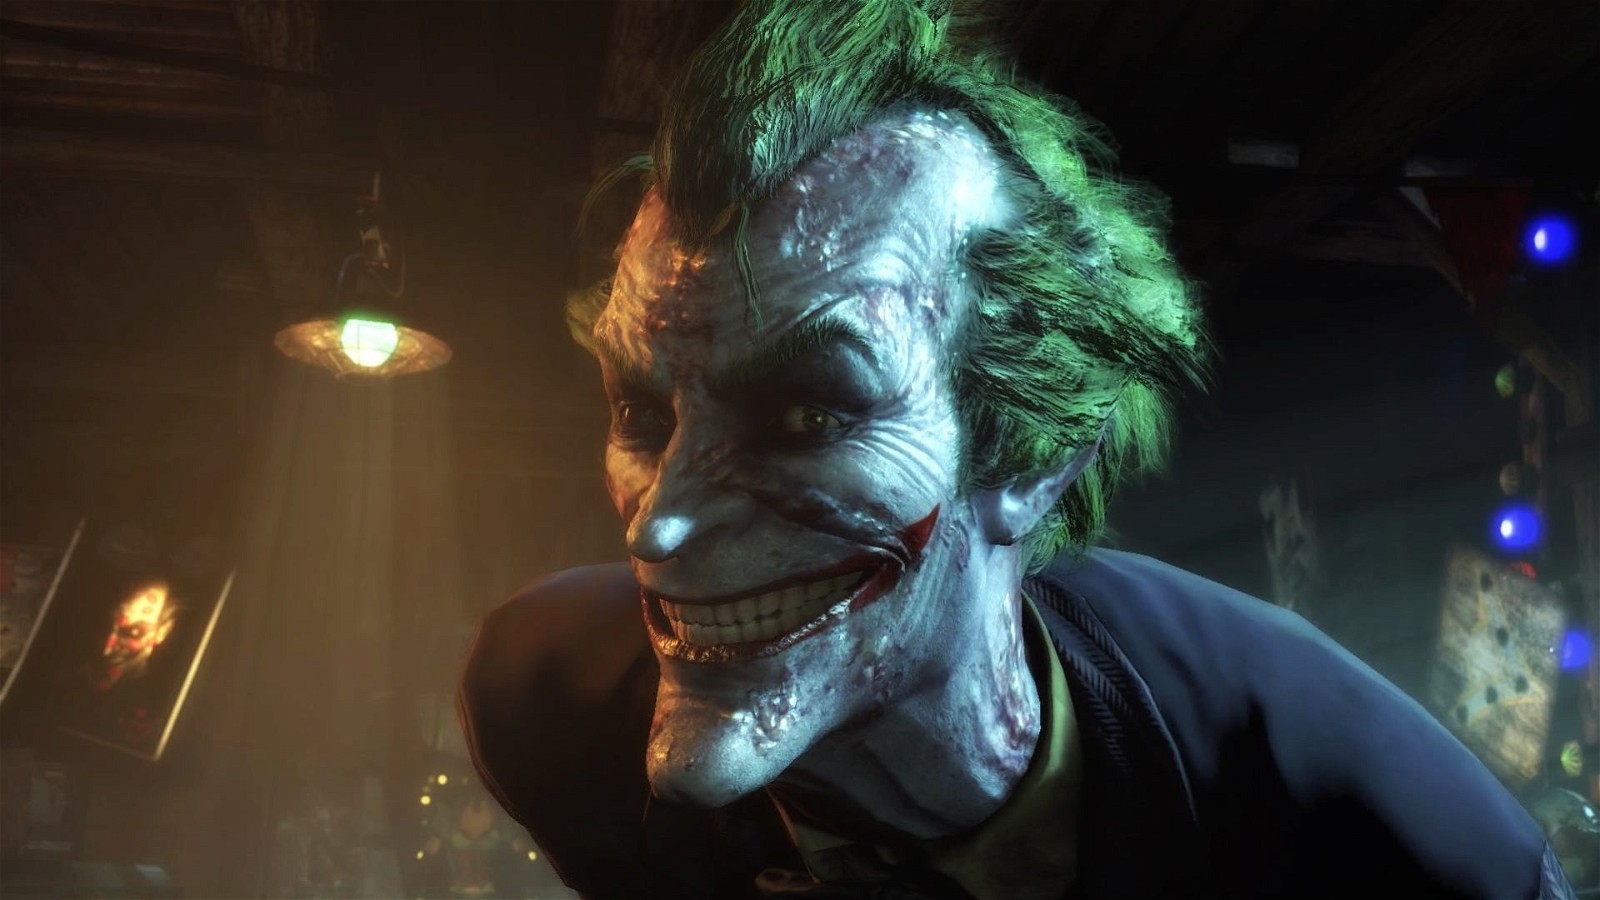 Voiced by Mark Hamill, the character of Joker in the Arkham series remains iconic.